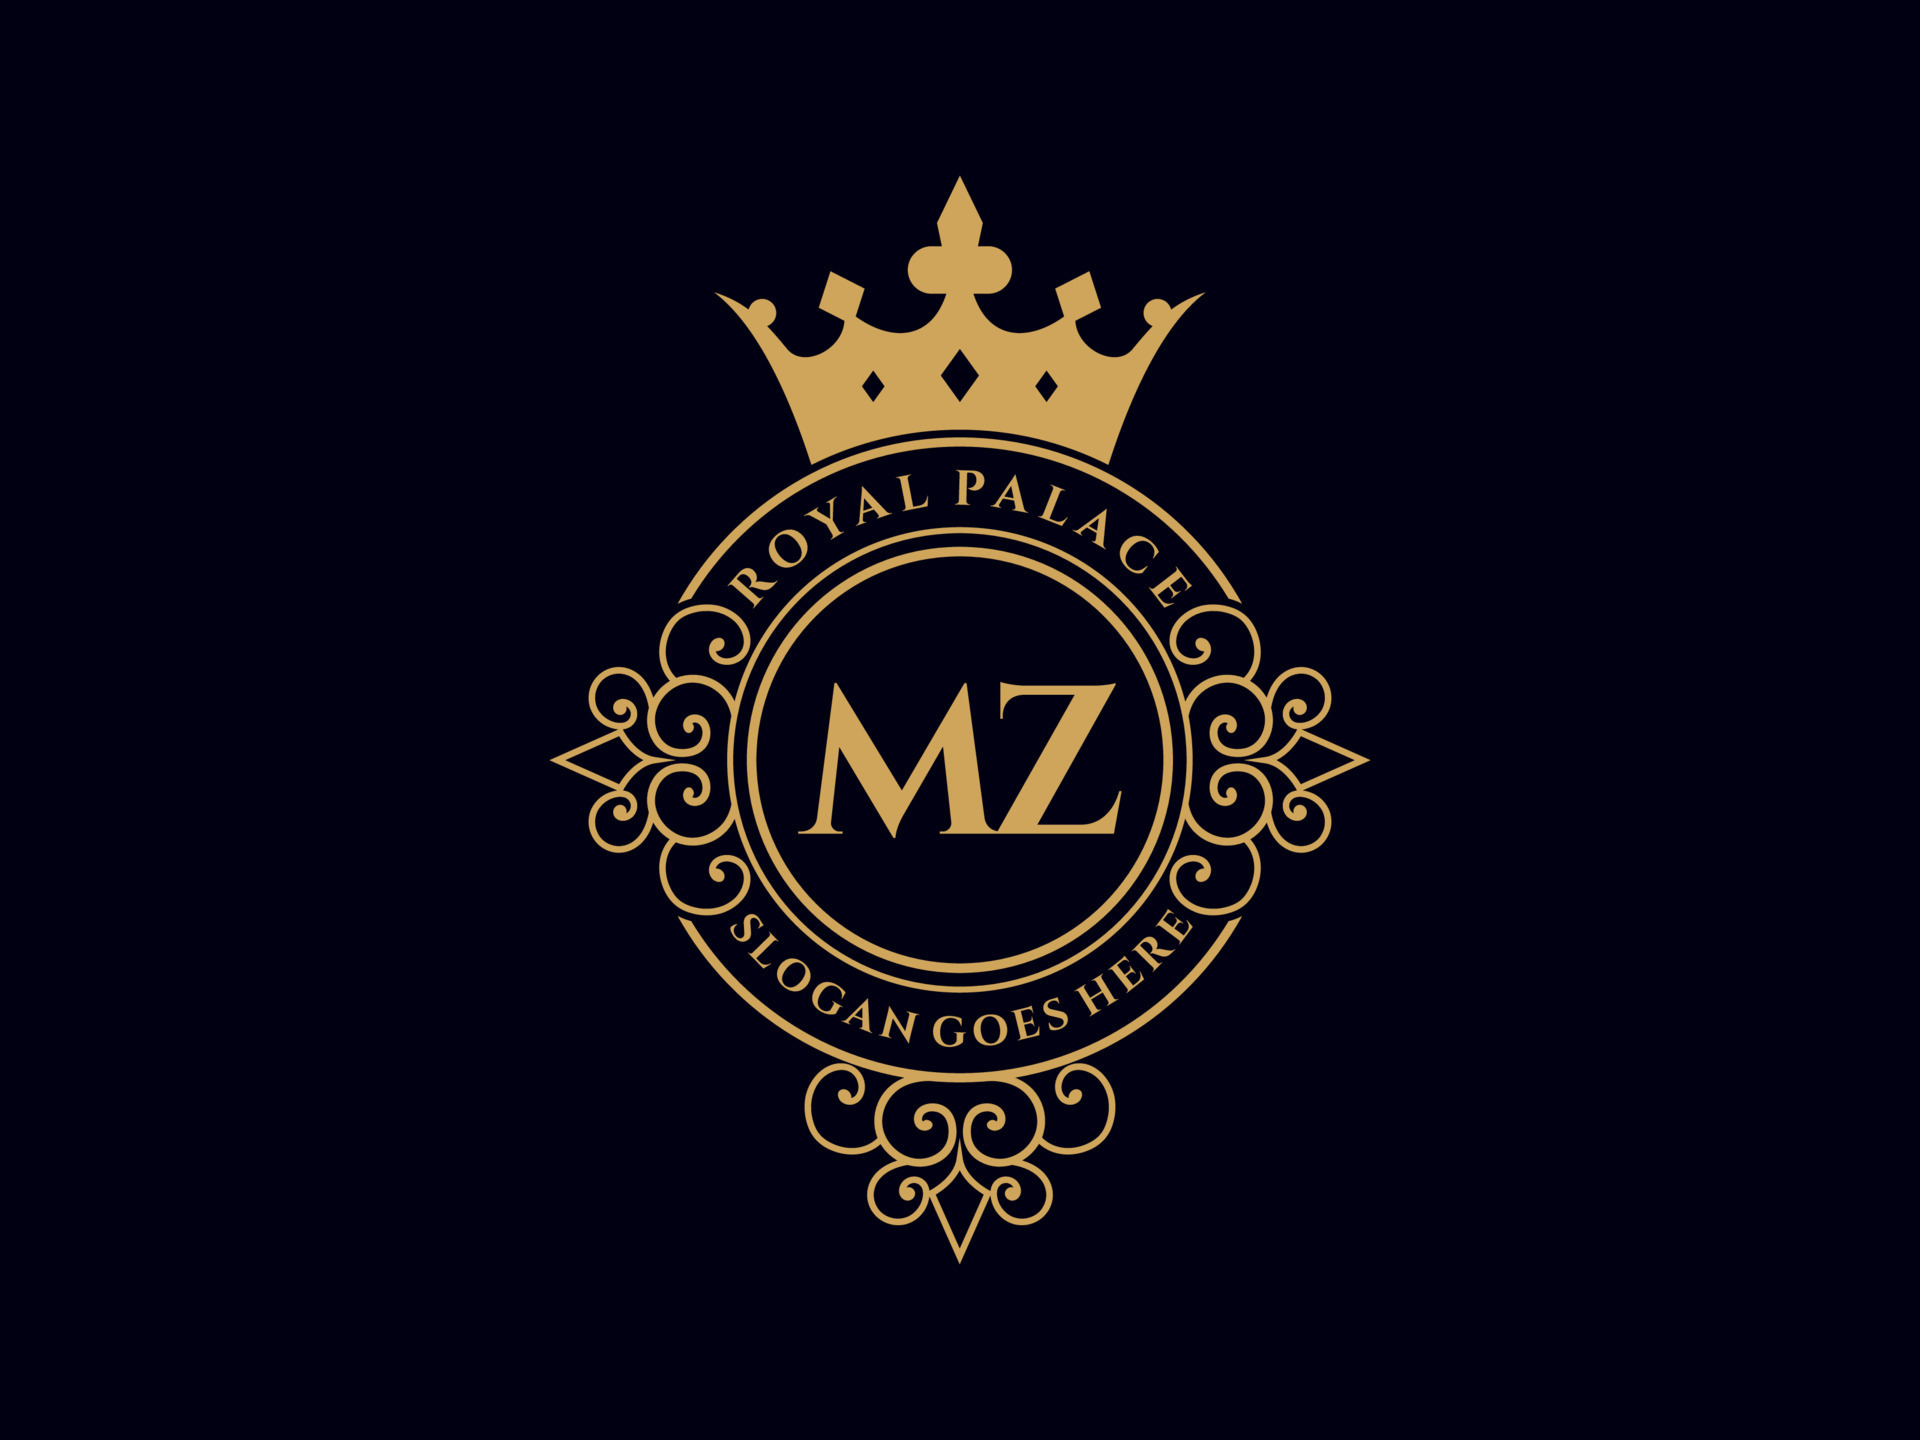 https://static.vecteezy.com/system/resources/previews/013/534/310/original/letter-mz-antique-royal-luxury-victorian-logo-with-ornamental-frame-free-vector.jpg